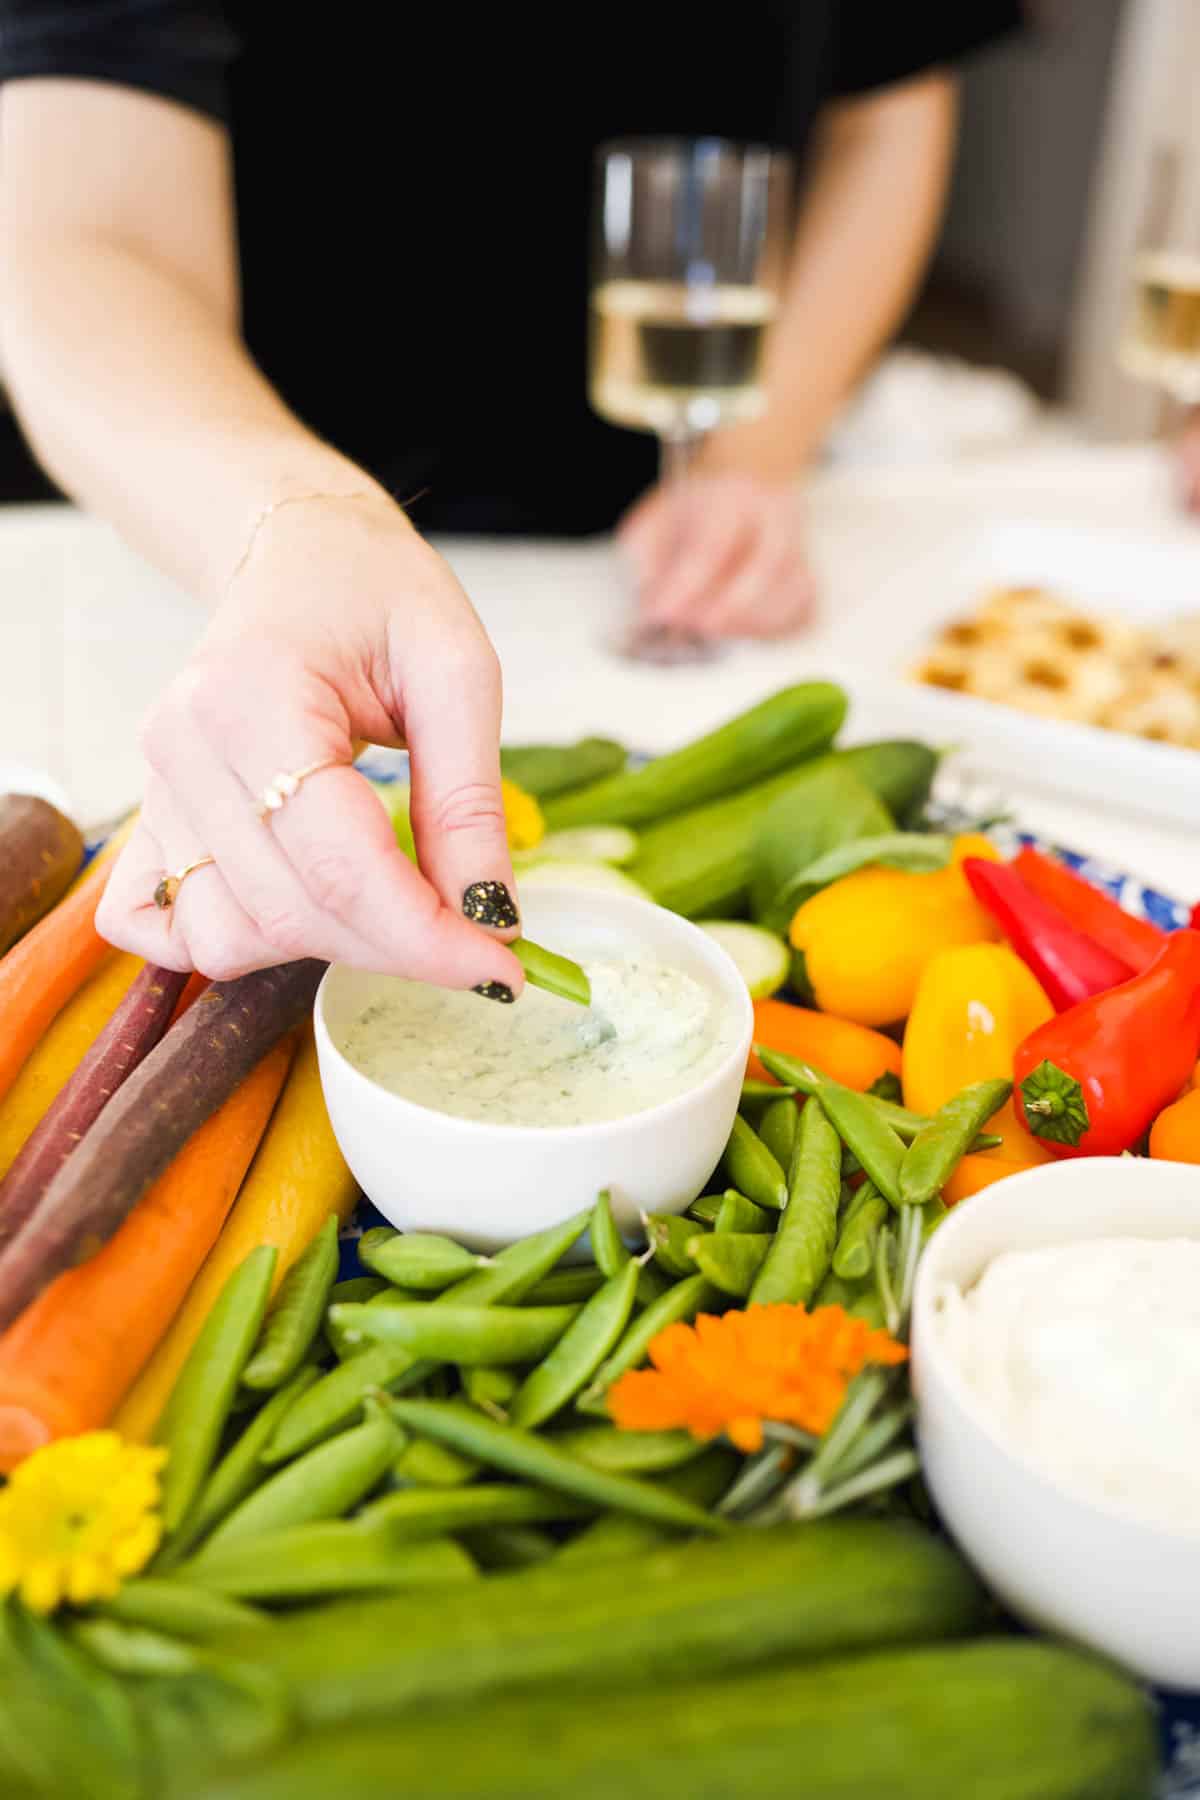 A woman dipping a veggie in a dip at a party.